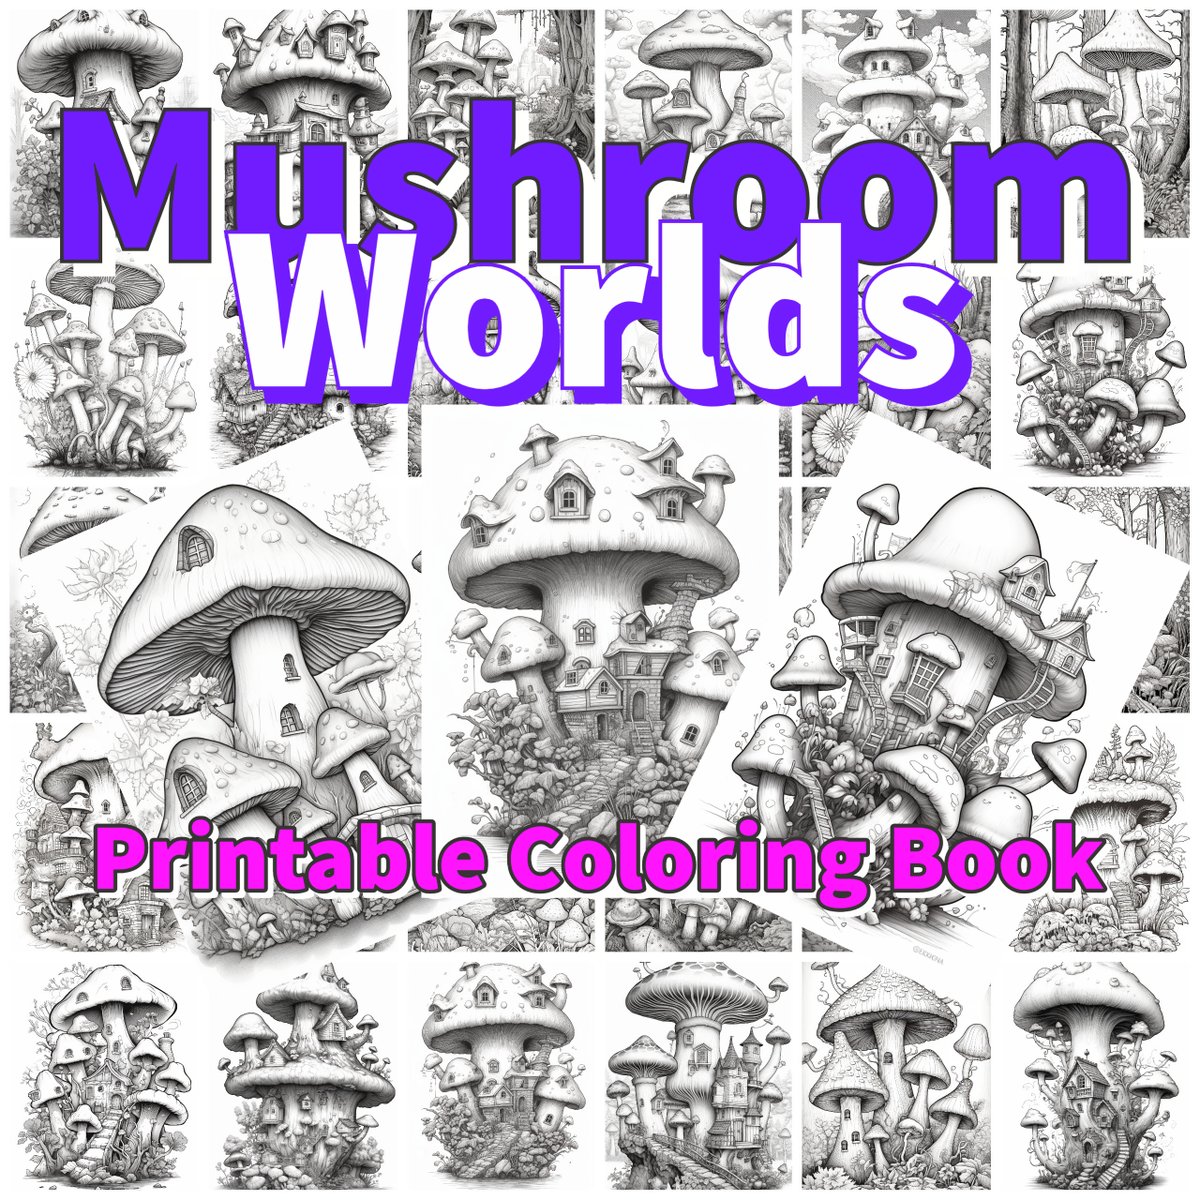 etsy.com/listing/147410…
Click the link above to add a touch of color to the world!
#Mushrooms #Nature #Coloring #ColoringBook #Art #Flowers #Cottage #TreeHouses #Fungi #Toadstool #MushroomArt #ColoringPages